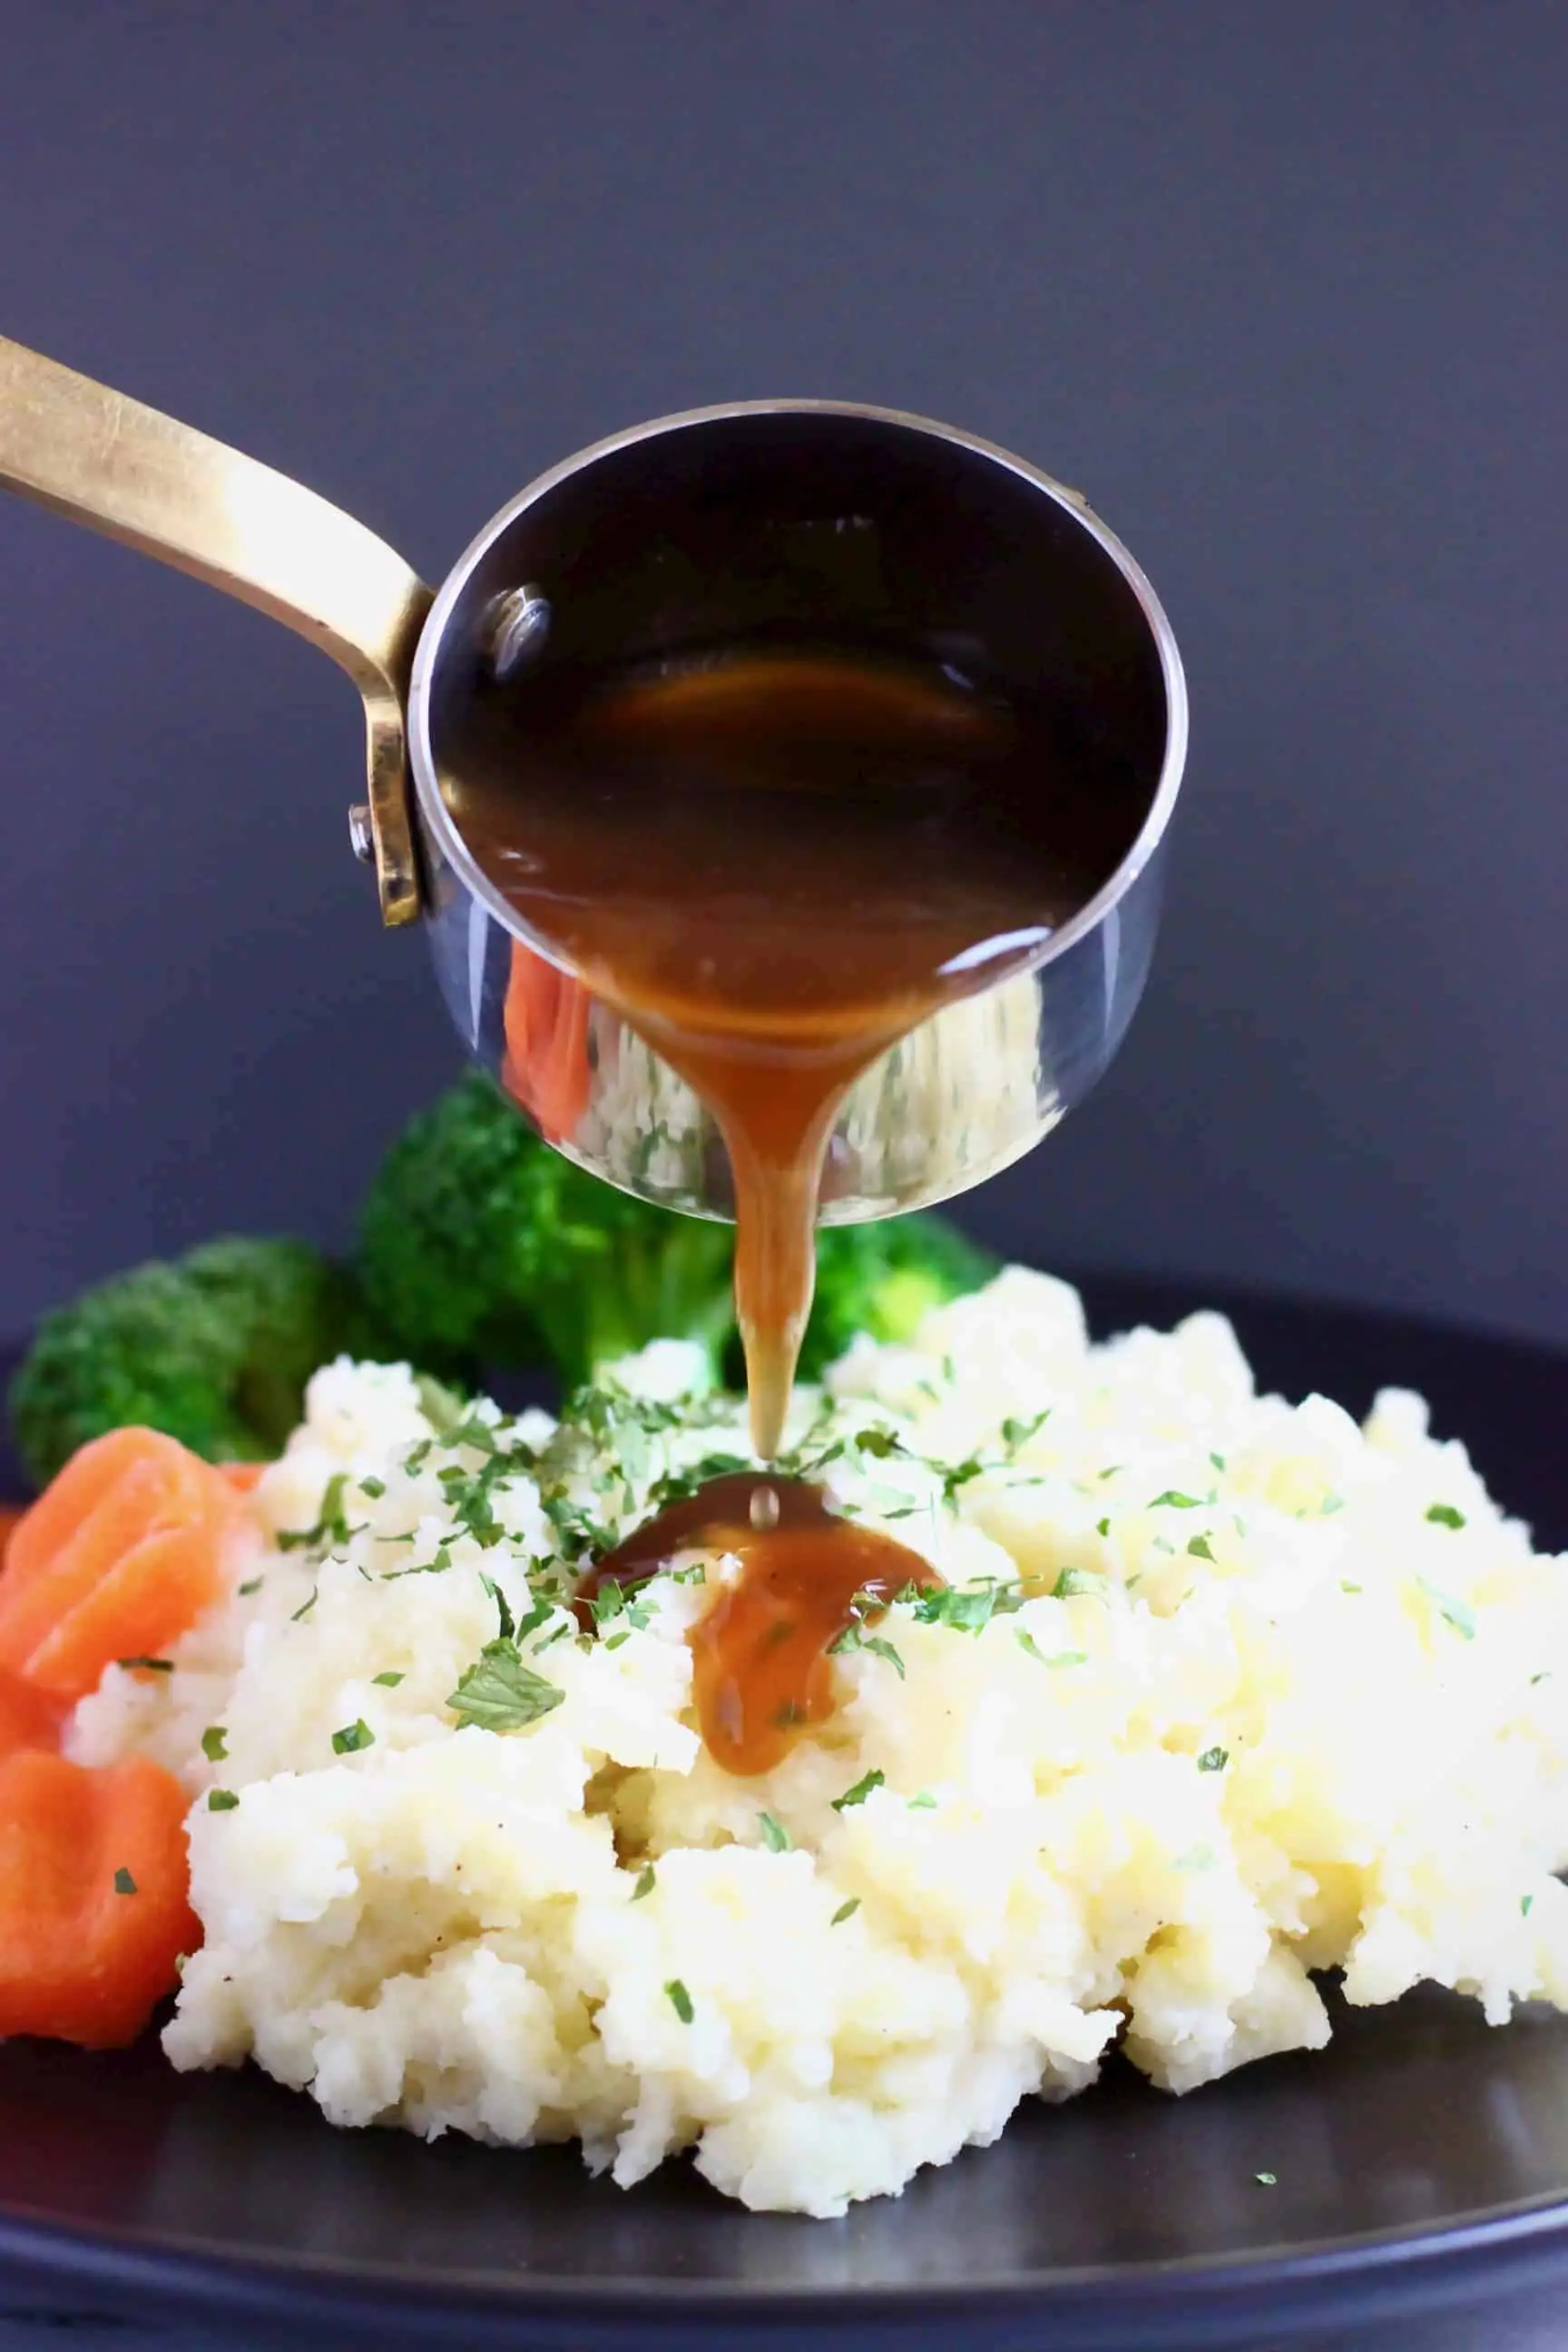 A pile of vegan mashed potatoes topped with green herbs with sliced carrots and broccoli on a black plate with brown gravy being poured over in a small saucepan 